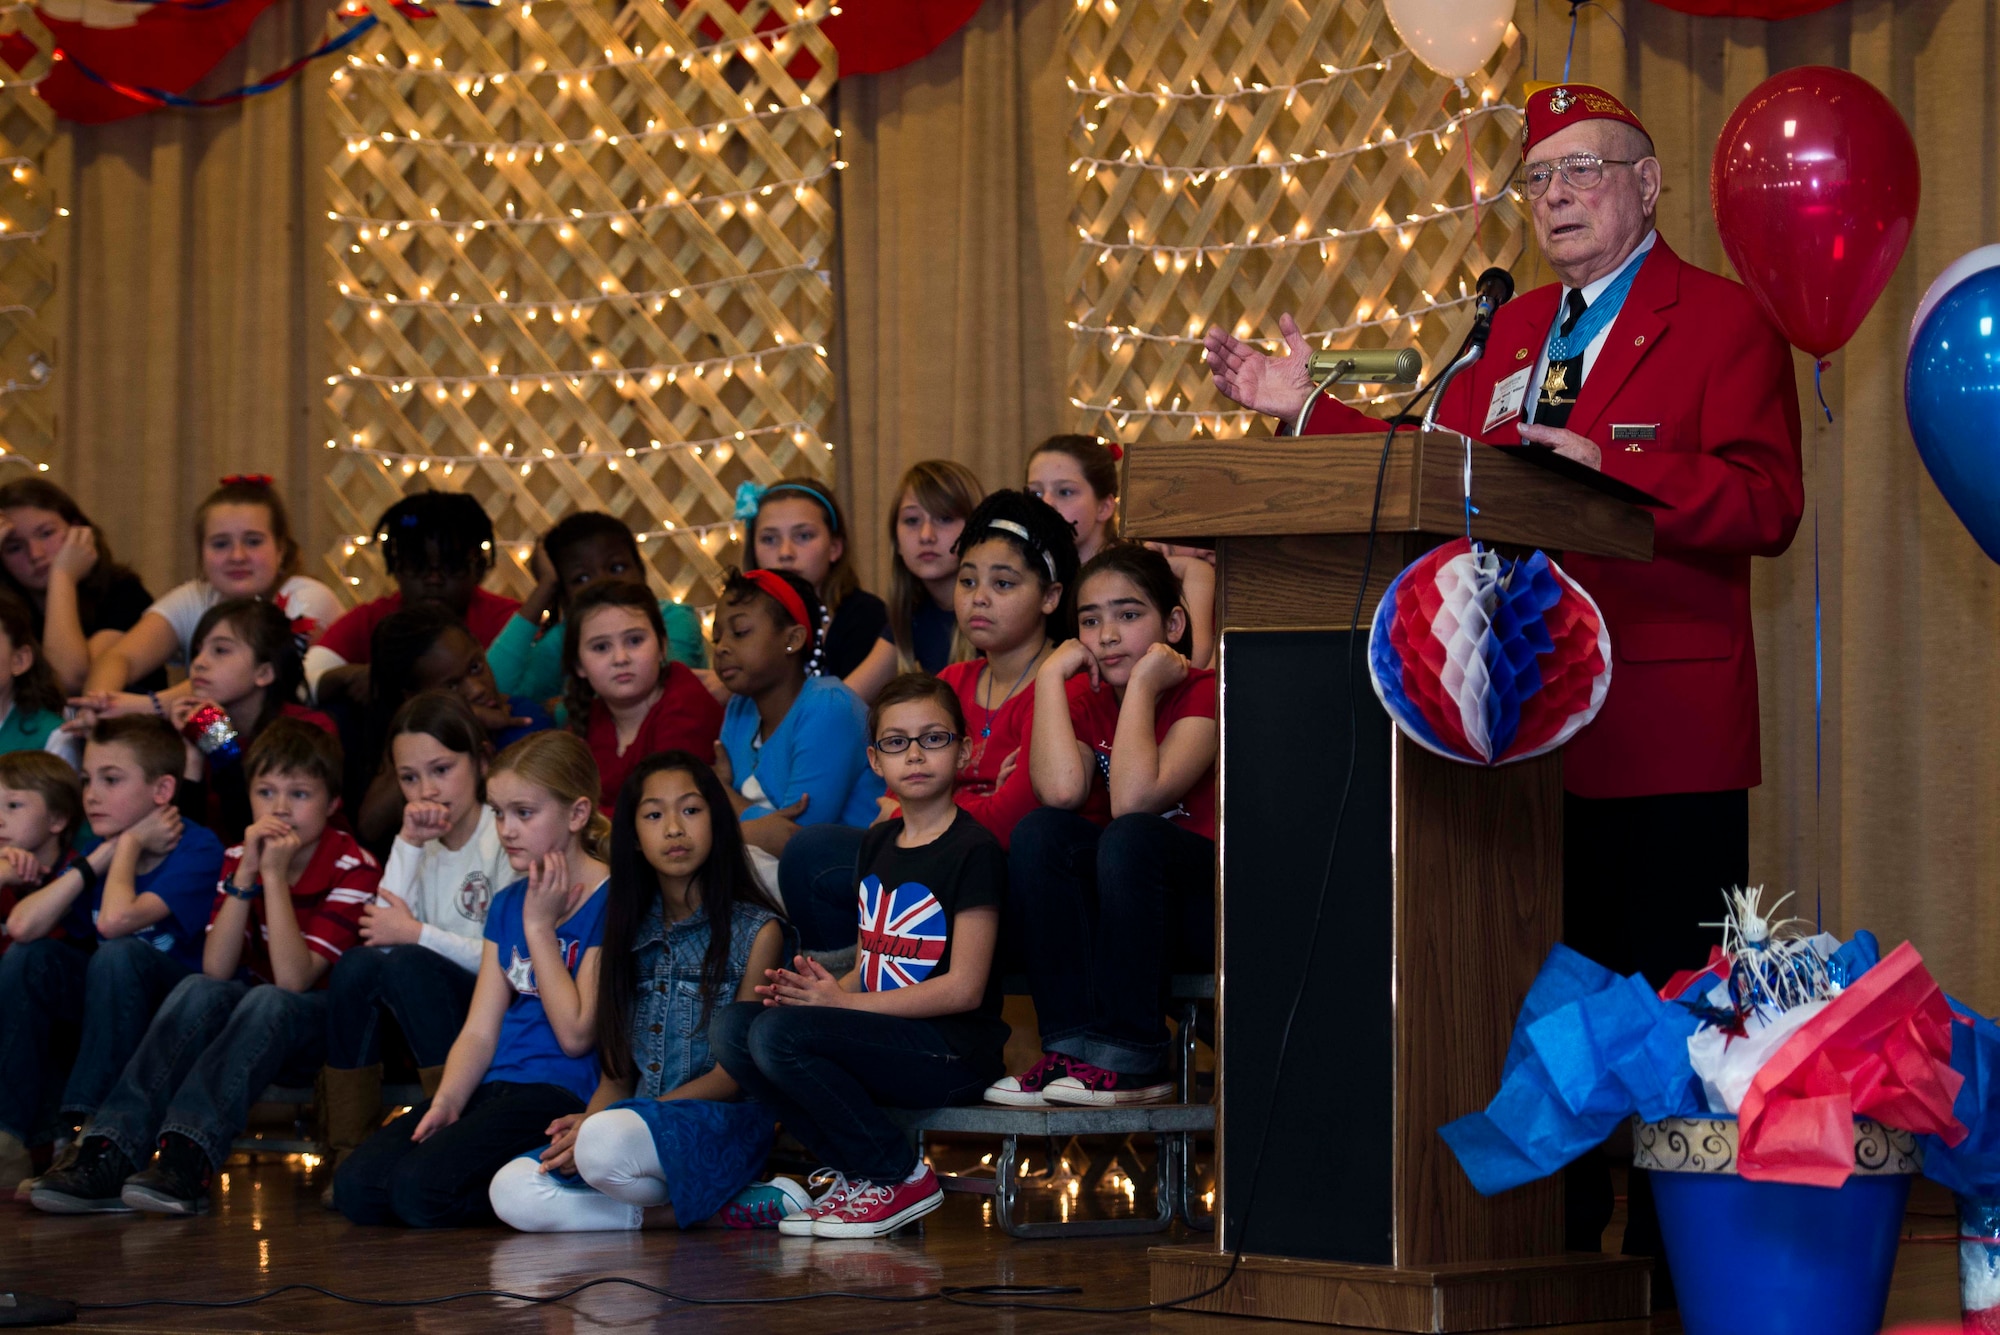 Hershel “Woody” Williams, Iwo Jima survivor and Medal of Honor recipient, tells a story to the Sheppard Elementary School students during the Iwo Jima Survivors 70th Reunion at Sheppard Air Force Base, Texas, Feb. 13, 2015. Williams shared his story of miracles during the last anniversary for the Iwo Jima survivors. He is the last living Iwo Jima Medal of Honor recipient. (U.S. Air Force photo by Senior Airman Kyle Gese/Released)